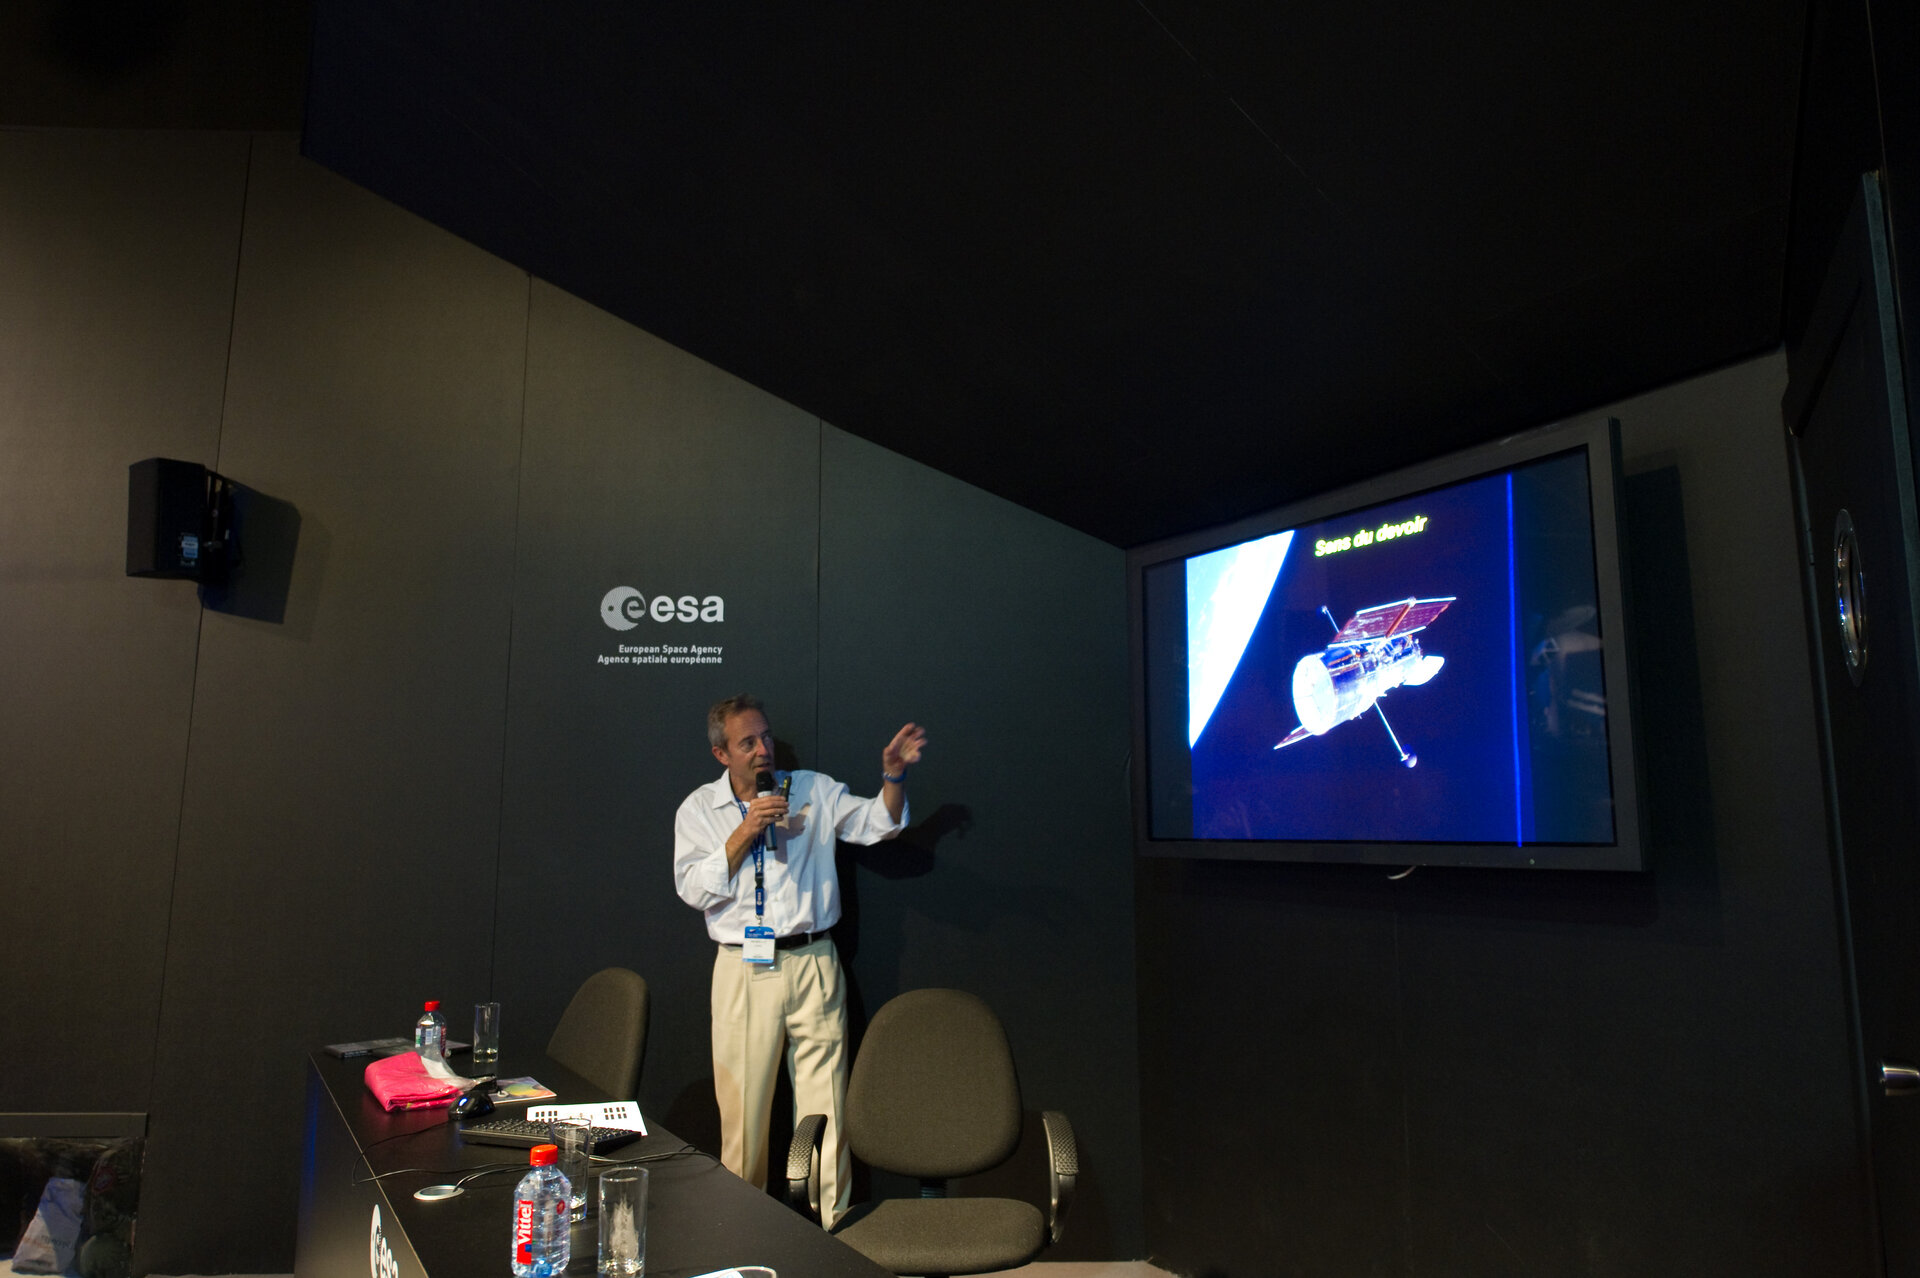 "Living & Working in Space" presentation by Jean-François Clervoy